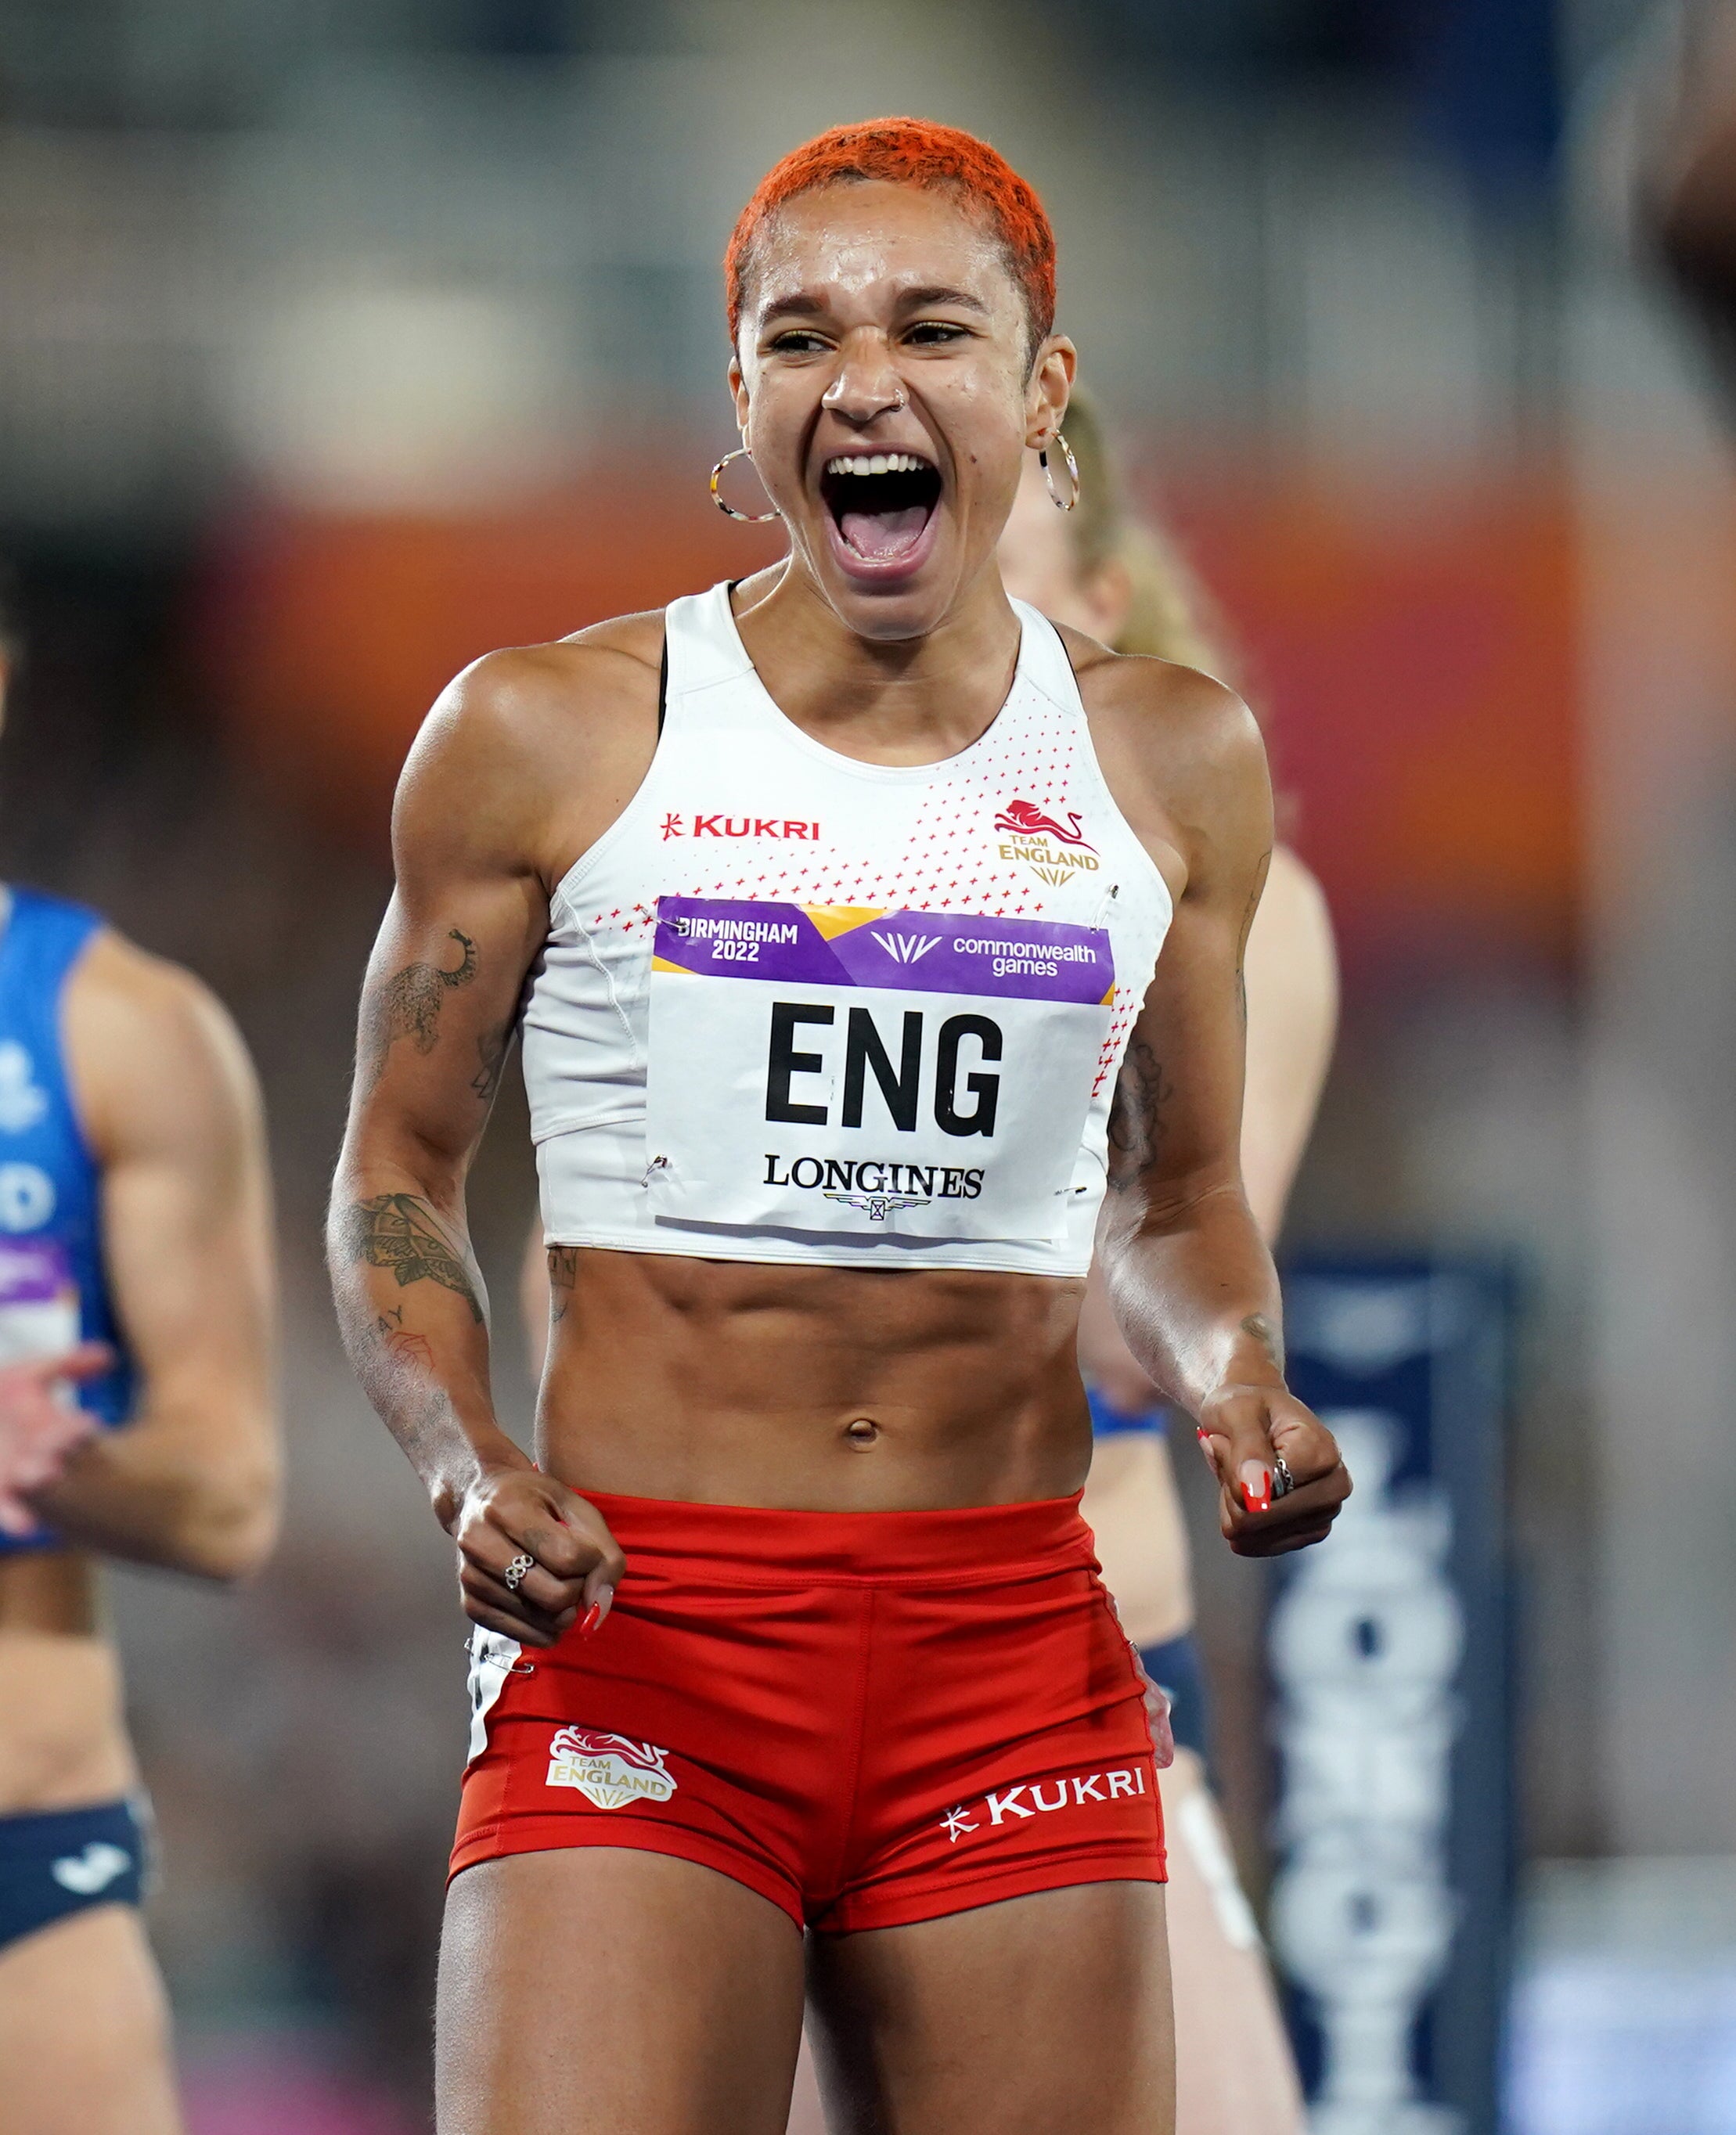 Jodie Williams celebrating her team victory in the Women’s 4 x 400m Relay Final at Alexander Stadium during the Commonwealth Games in 2022 (Jacob King/PA)